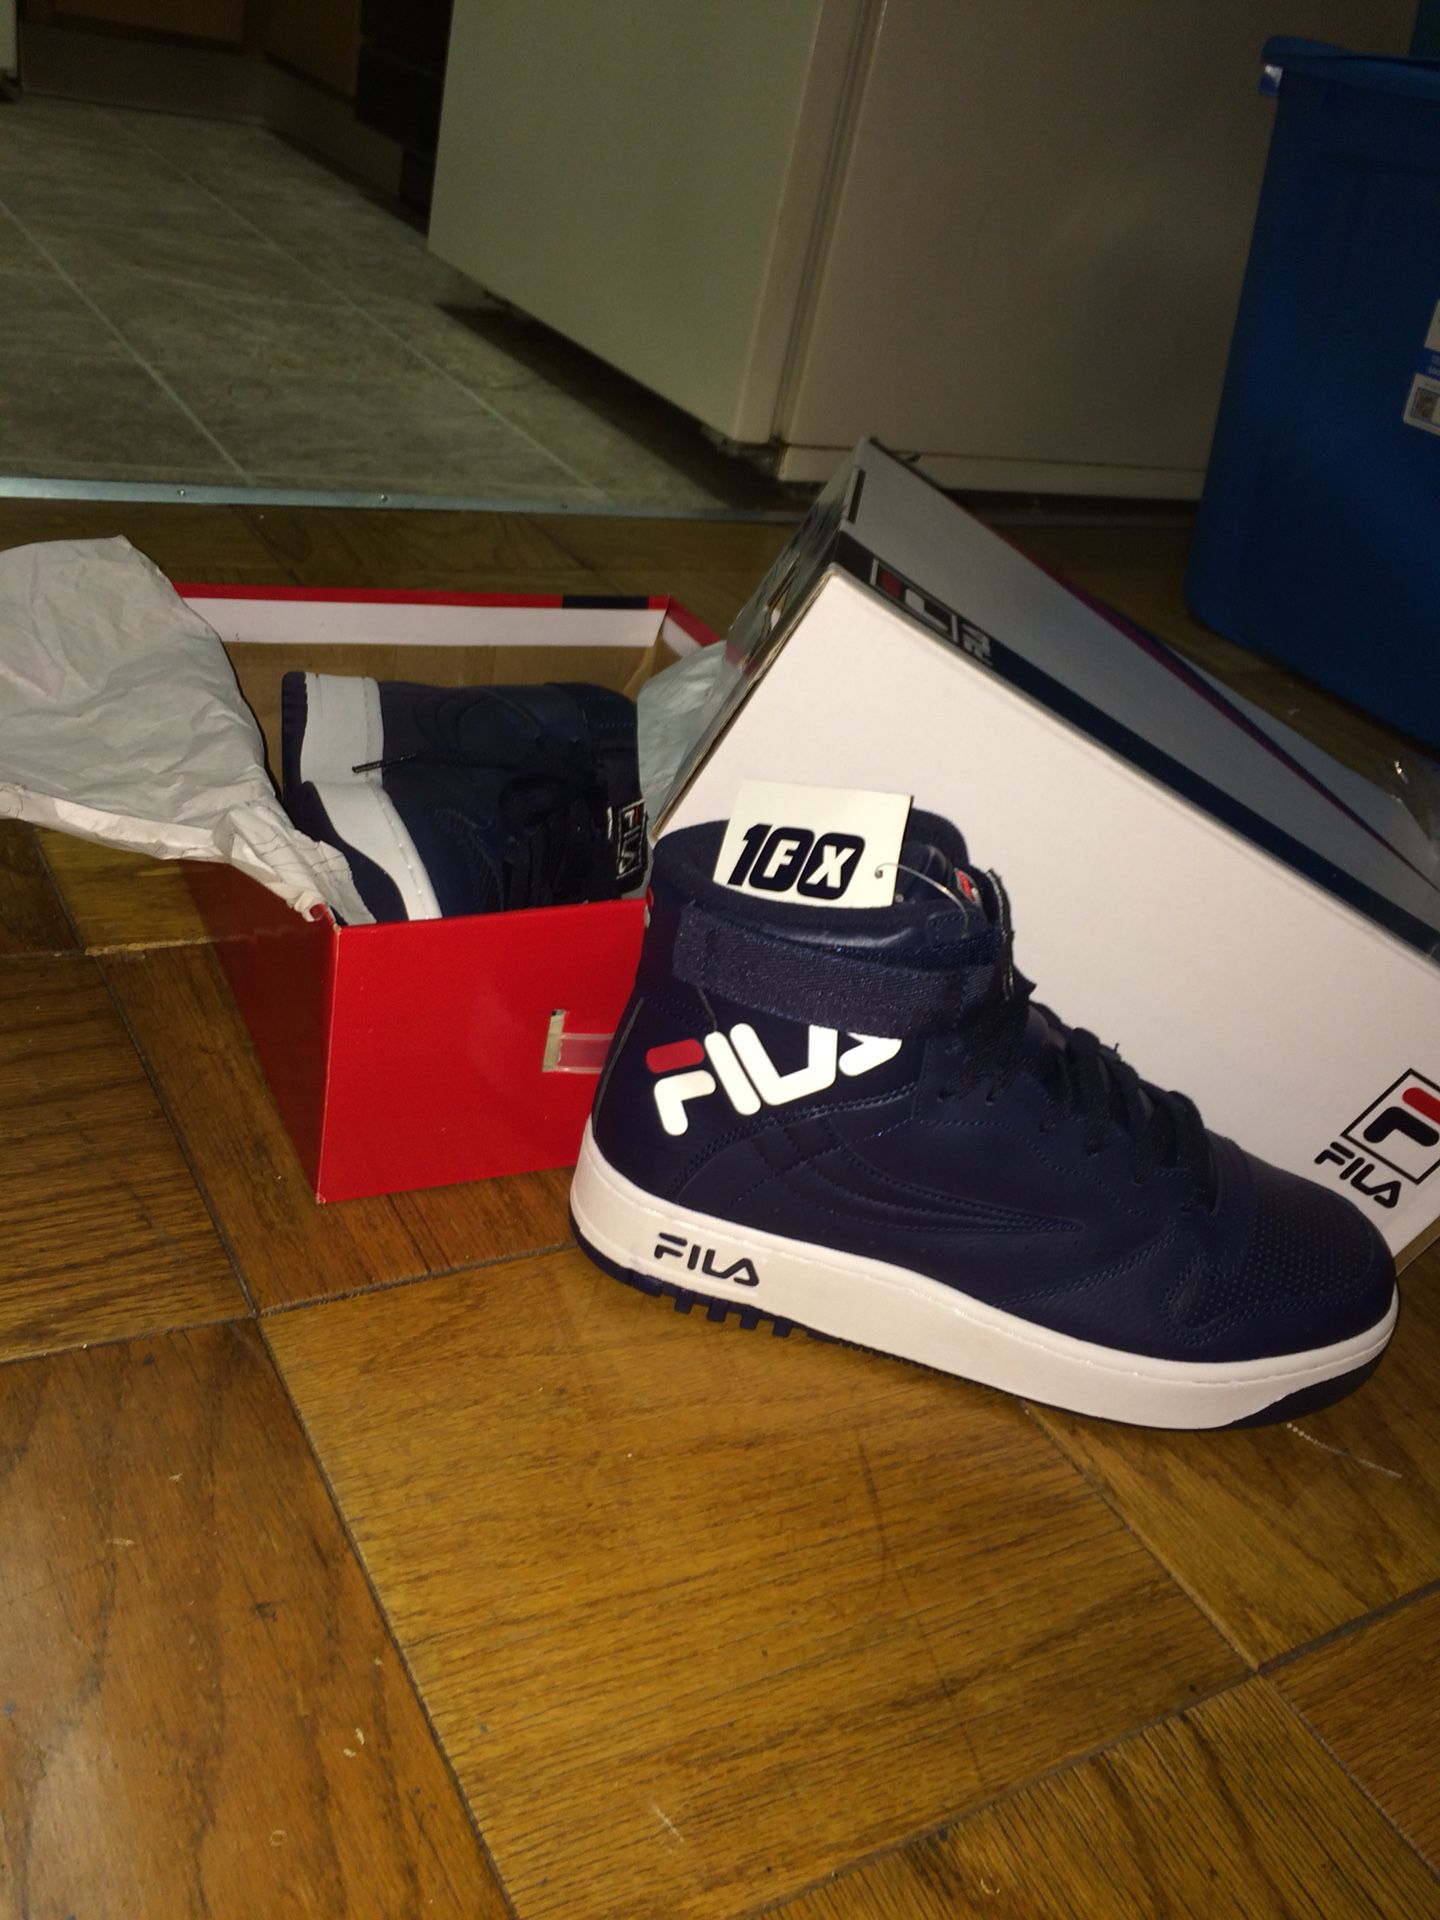 Brand new pair of FILA size 10 for sell